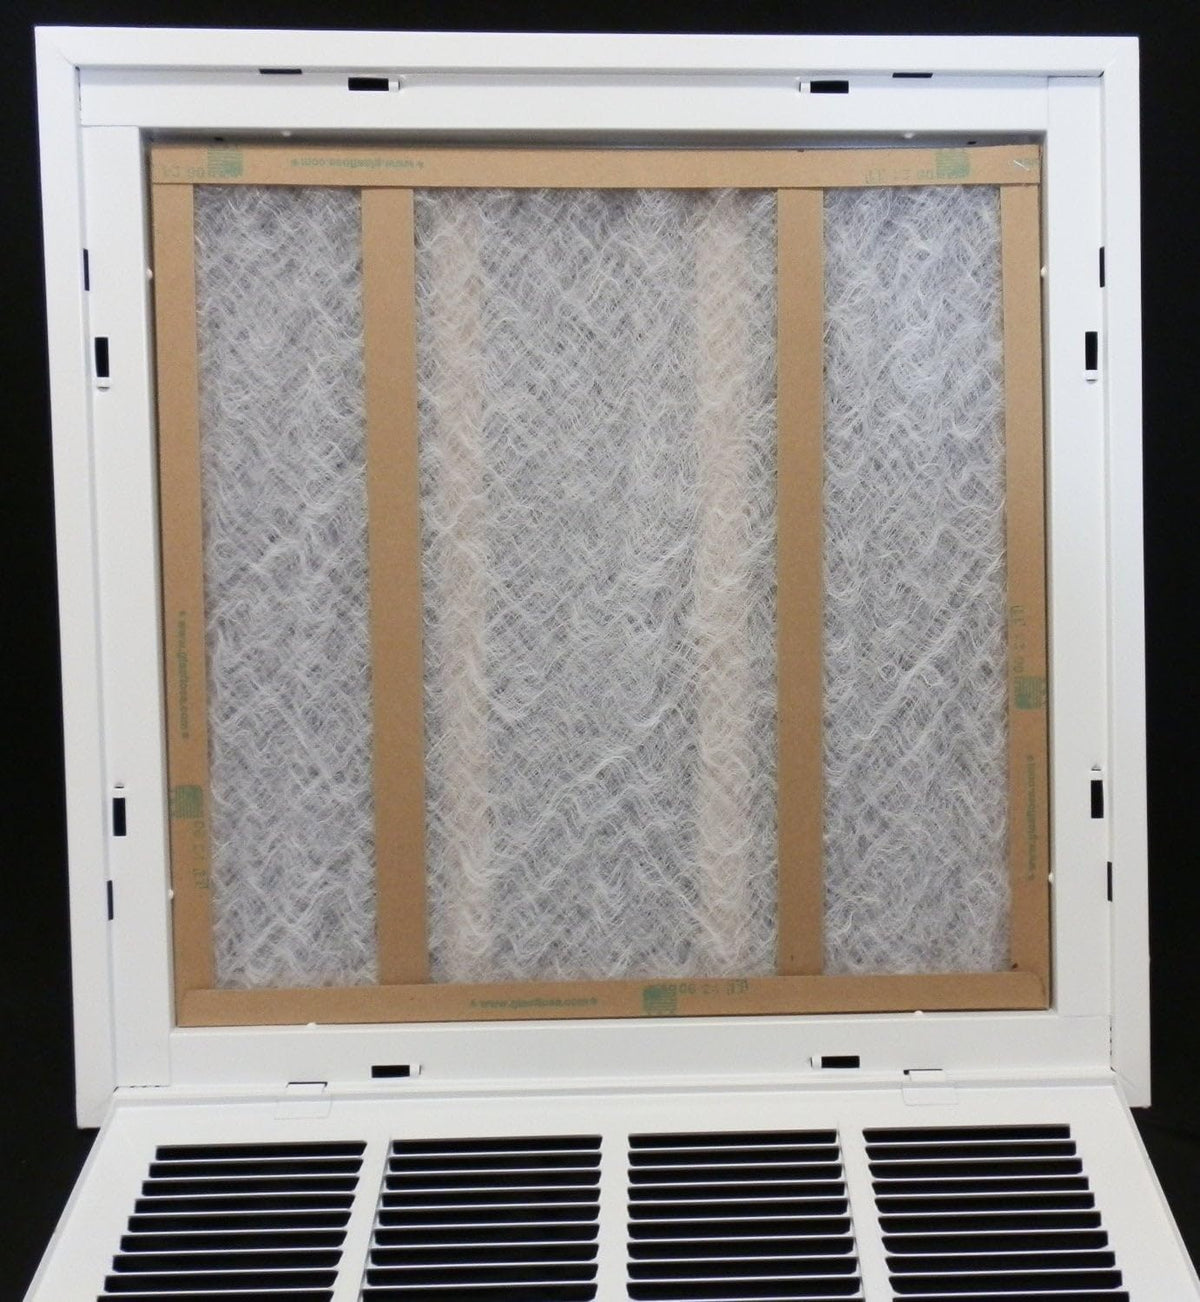 26&quot; X 22&quot; Steel Return Air Filter Grille for 1&quot; Filter - Removable Frame - [Outer Dimensions: 28 5/8&quot; X 24 5/8&quot;]